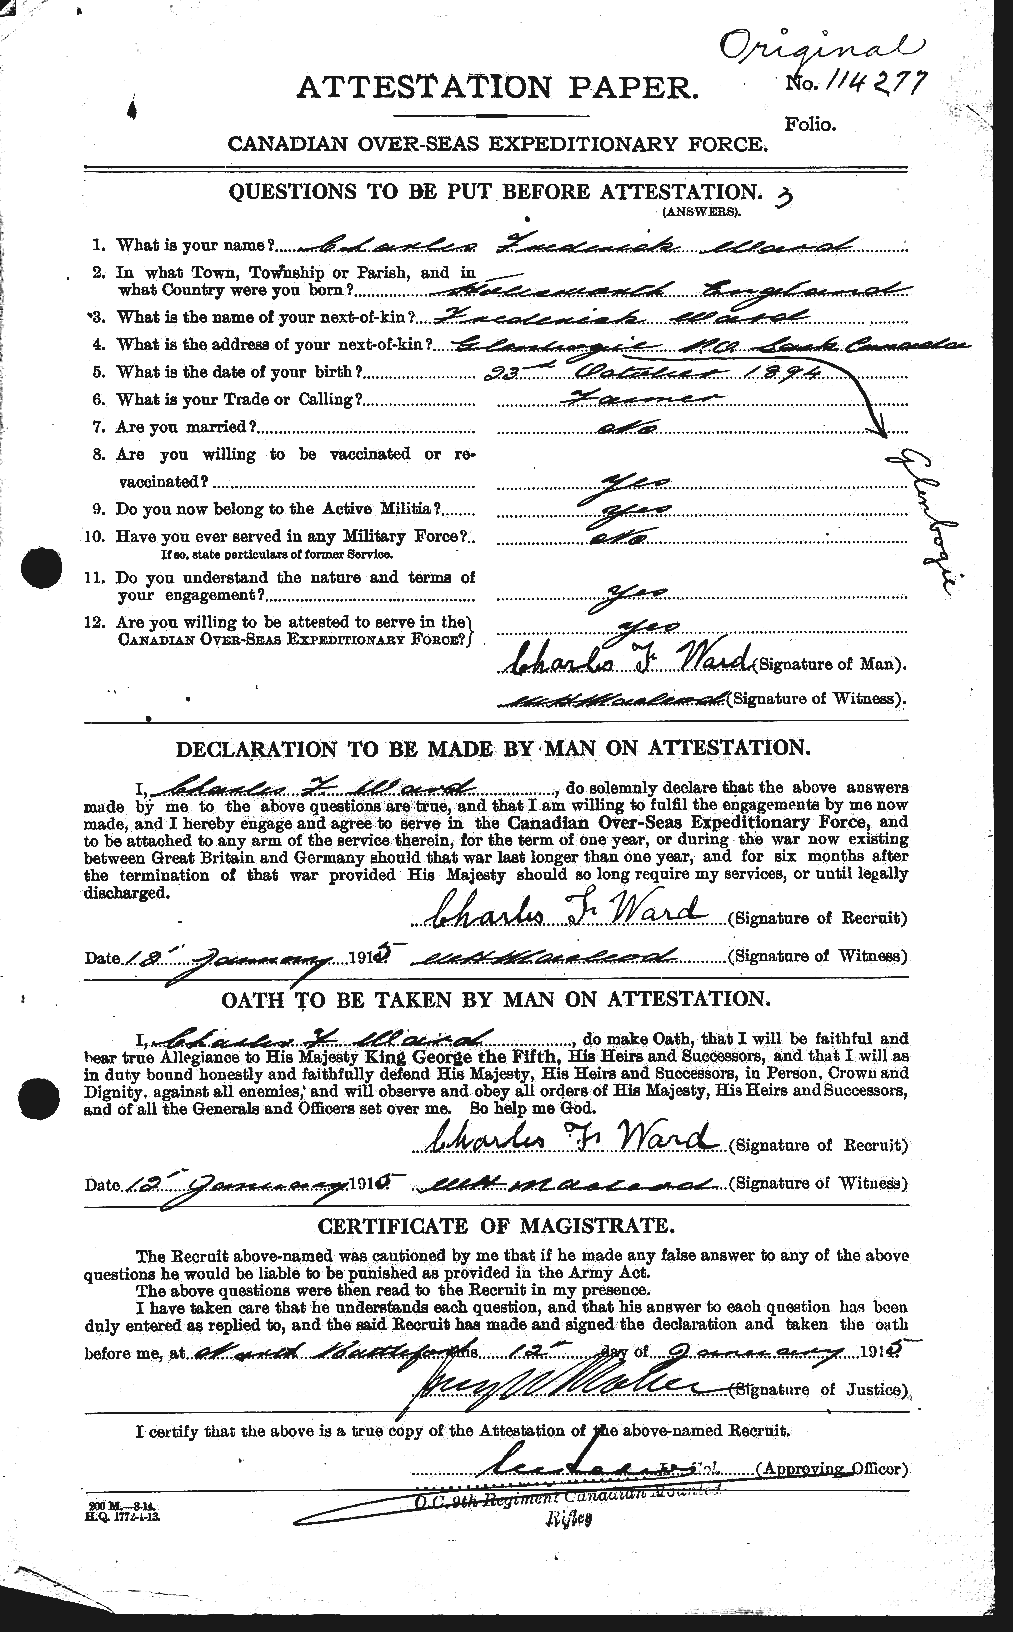 Personnel Records of the First World War - CEF 657580a